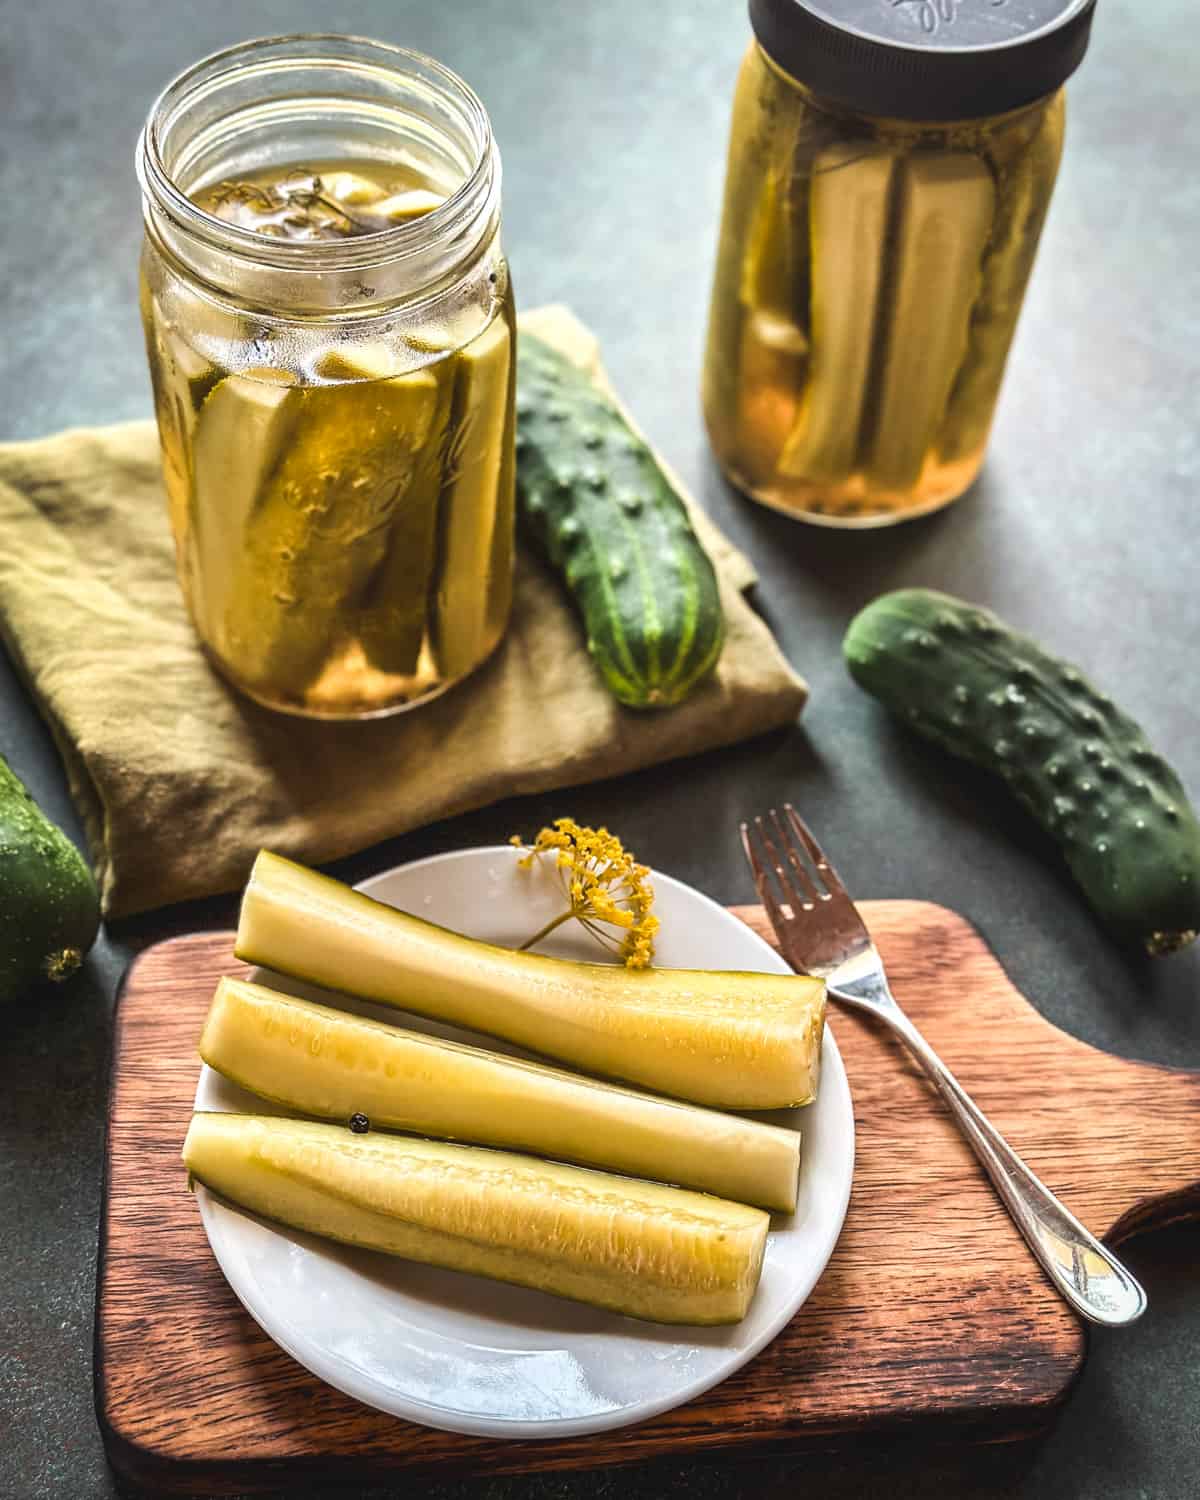 A finished jar of pickles opened with some pickle spears laying on a plate with a fork beside it on a wooden cutting board. Surrounded by a closed jar of pickles and fresh cucumbers.